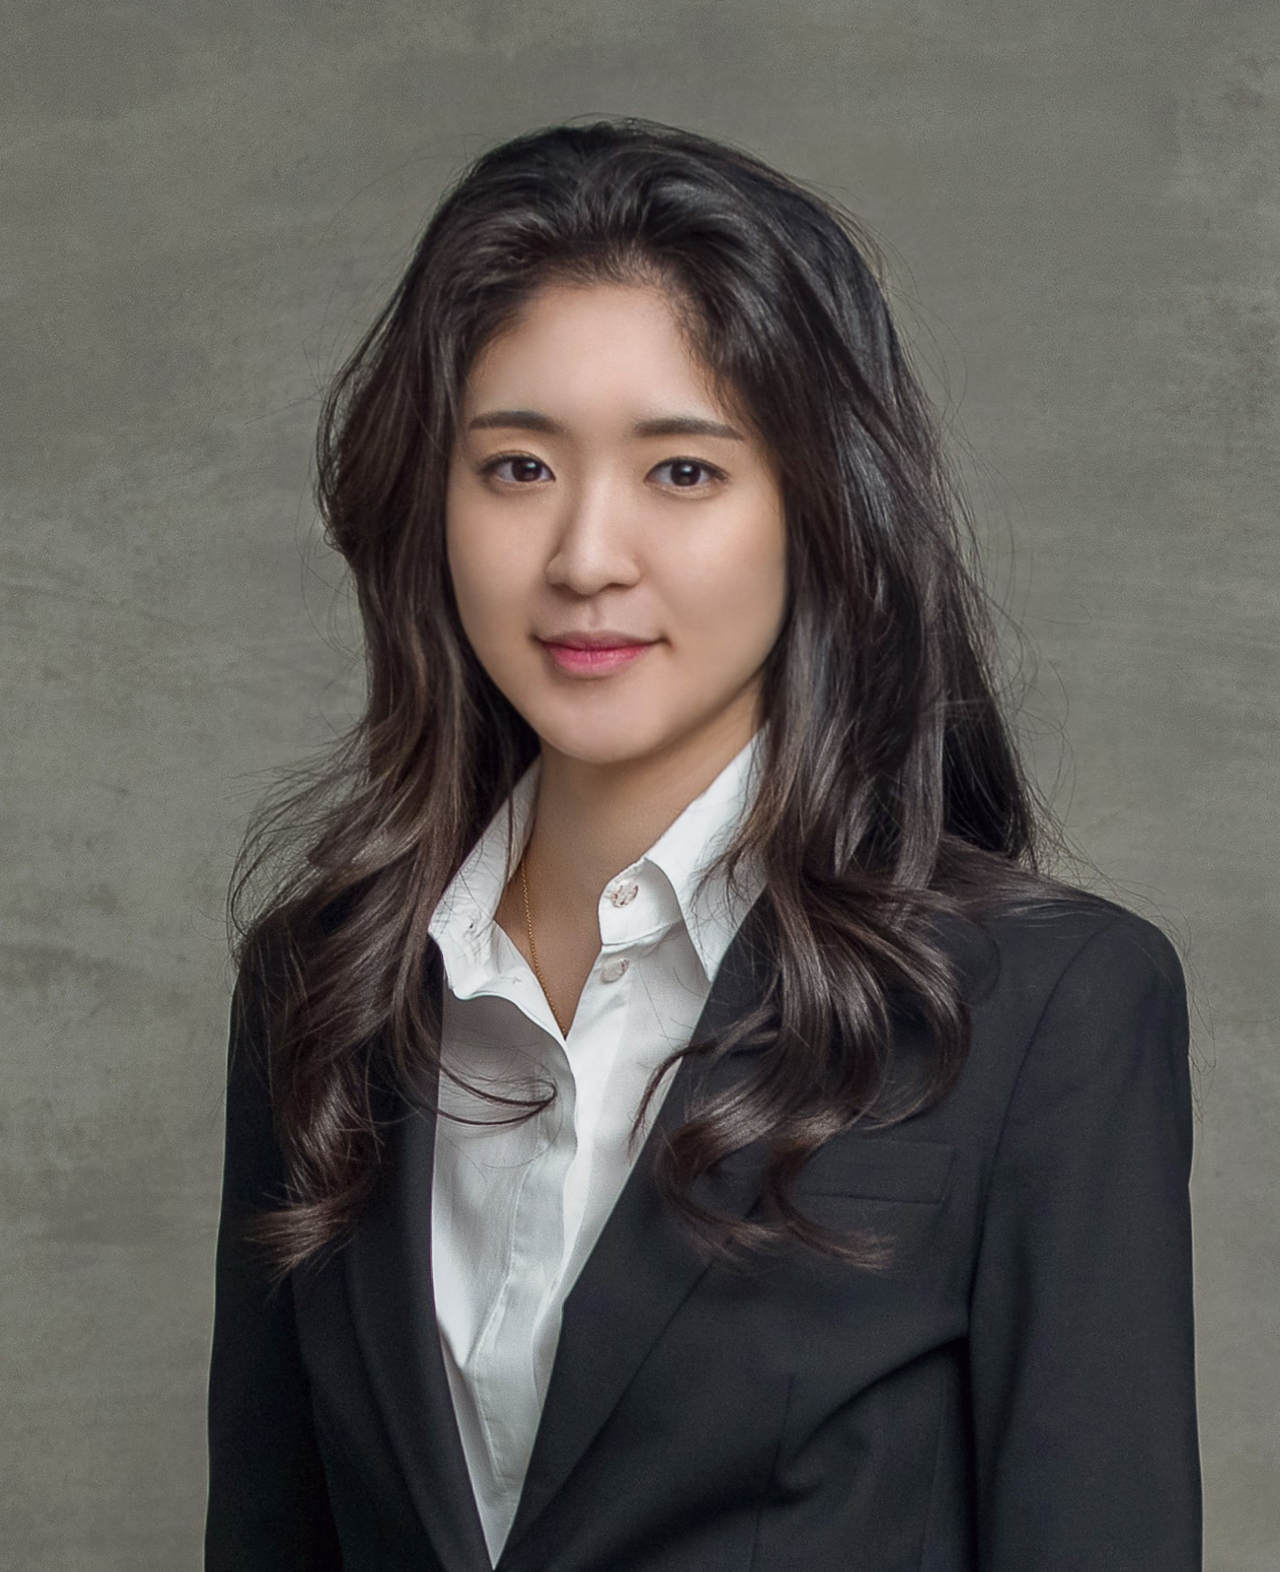 Suh Min-jeong, the elder daughter of Amorepacific Chairman Suh Kyung-bae (Amorepacific Group)